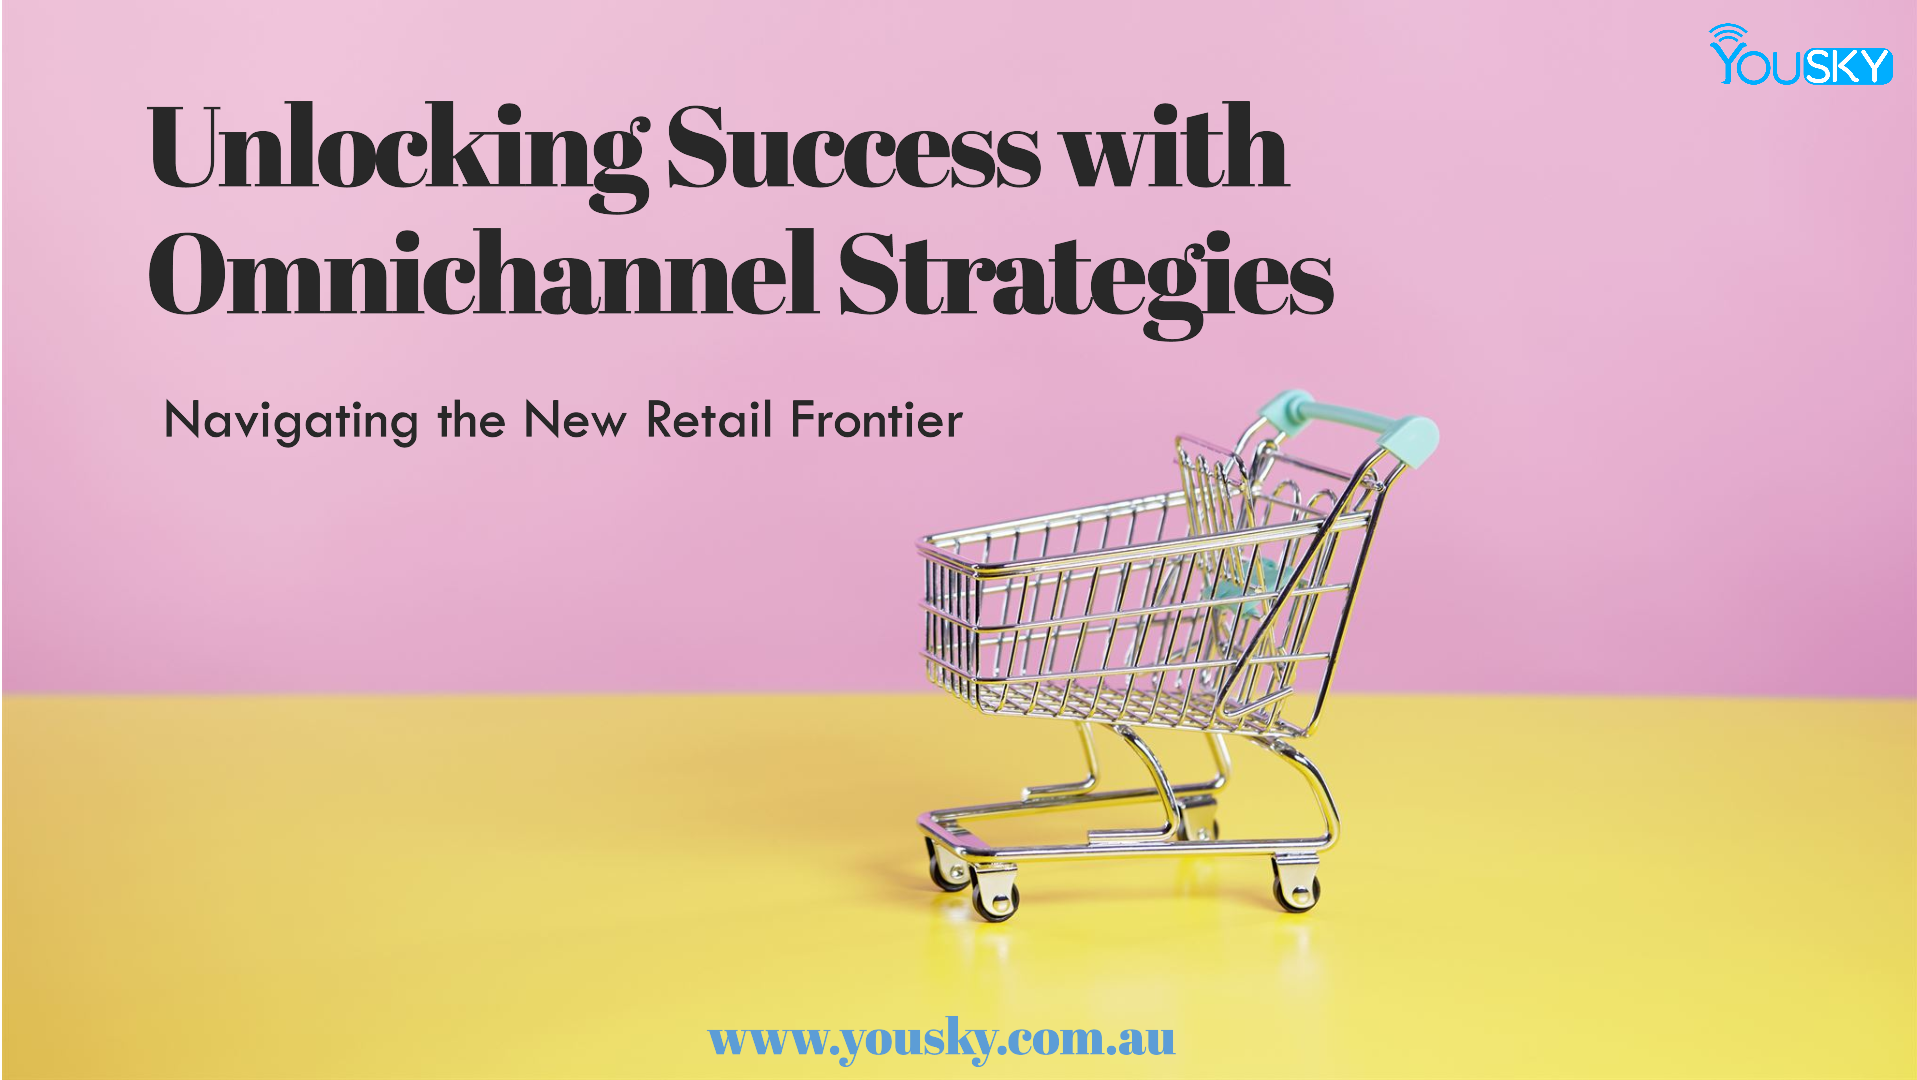 Navigating the New Retail Frontier: Unlocking Success with Omnichannel Strategies